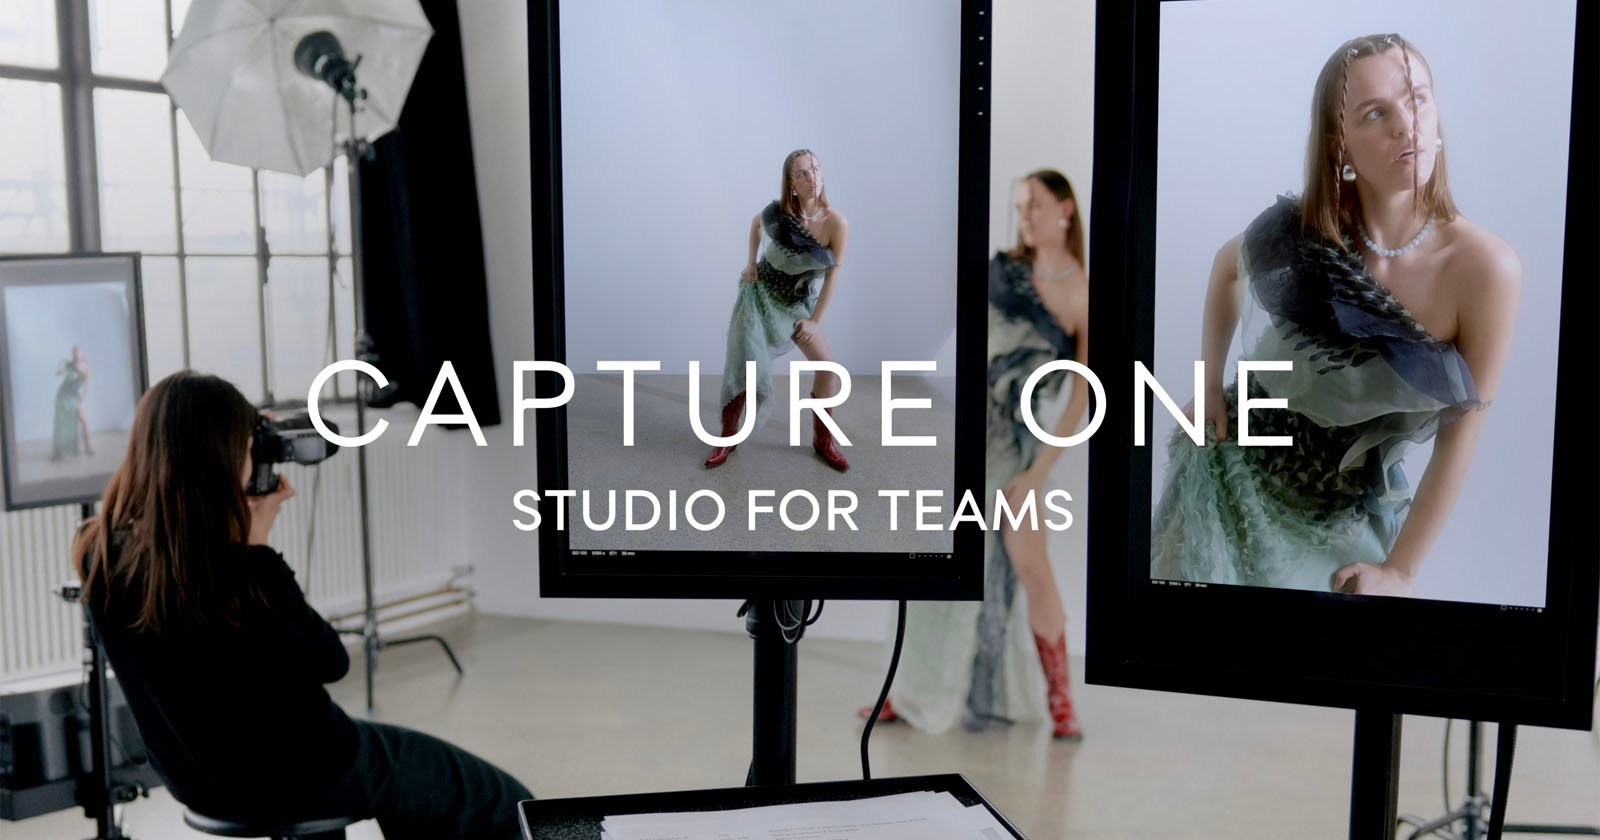 A photographer works in a studio, using a camera and digital screens to capture images of a model posing in stylish outfits. The text CAPTURE ONE STUDIO FOR TEAMS overlays the image. The scene is well-lit and features professional photography equipment.